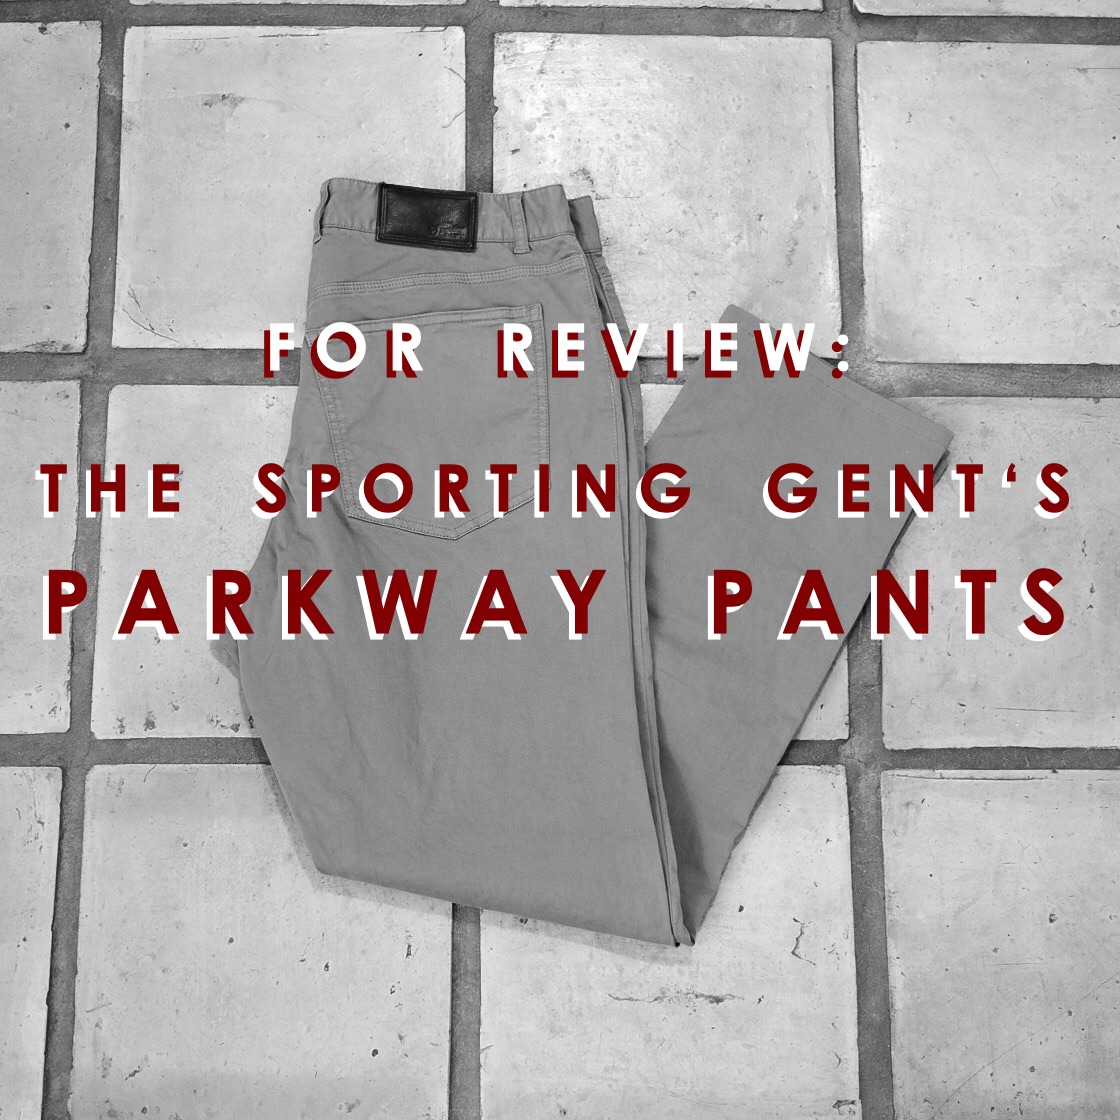 Red pants, squatchees and cig pockets: Reviewing the finer points